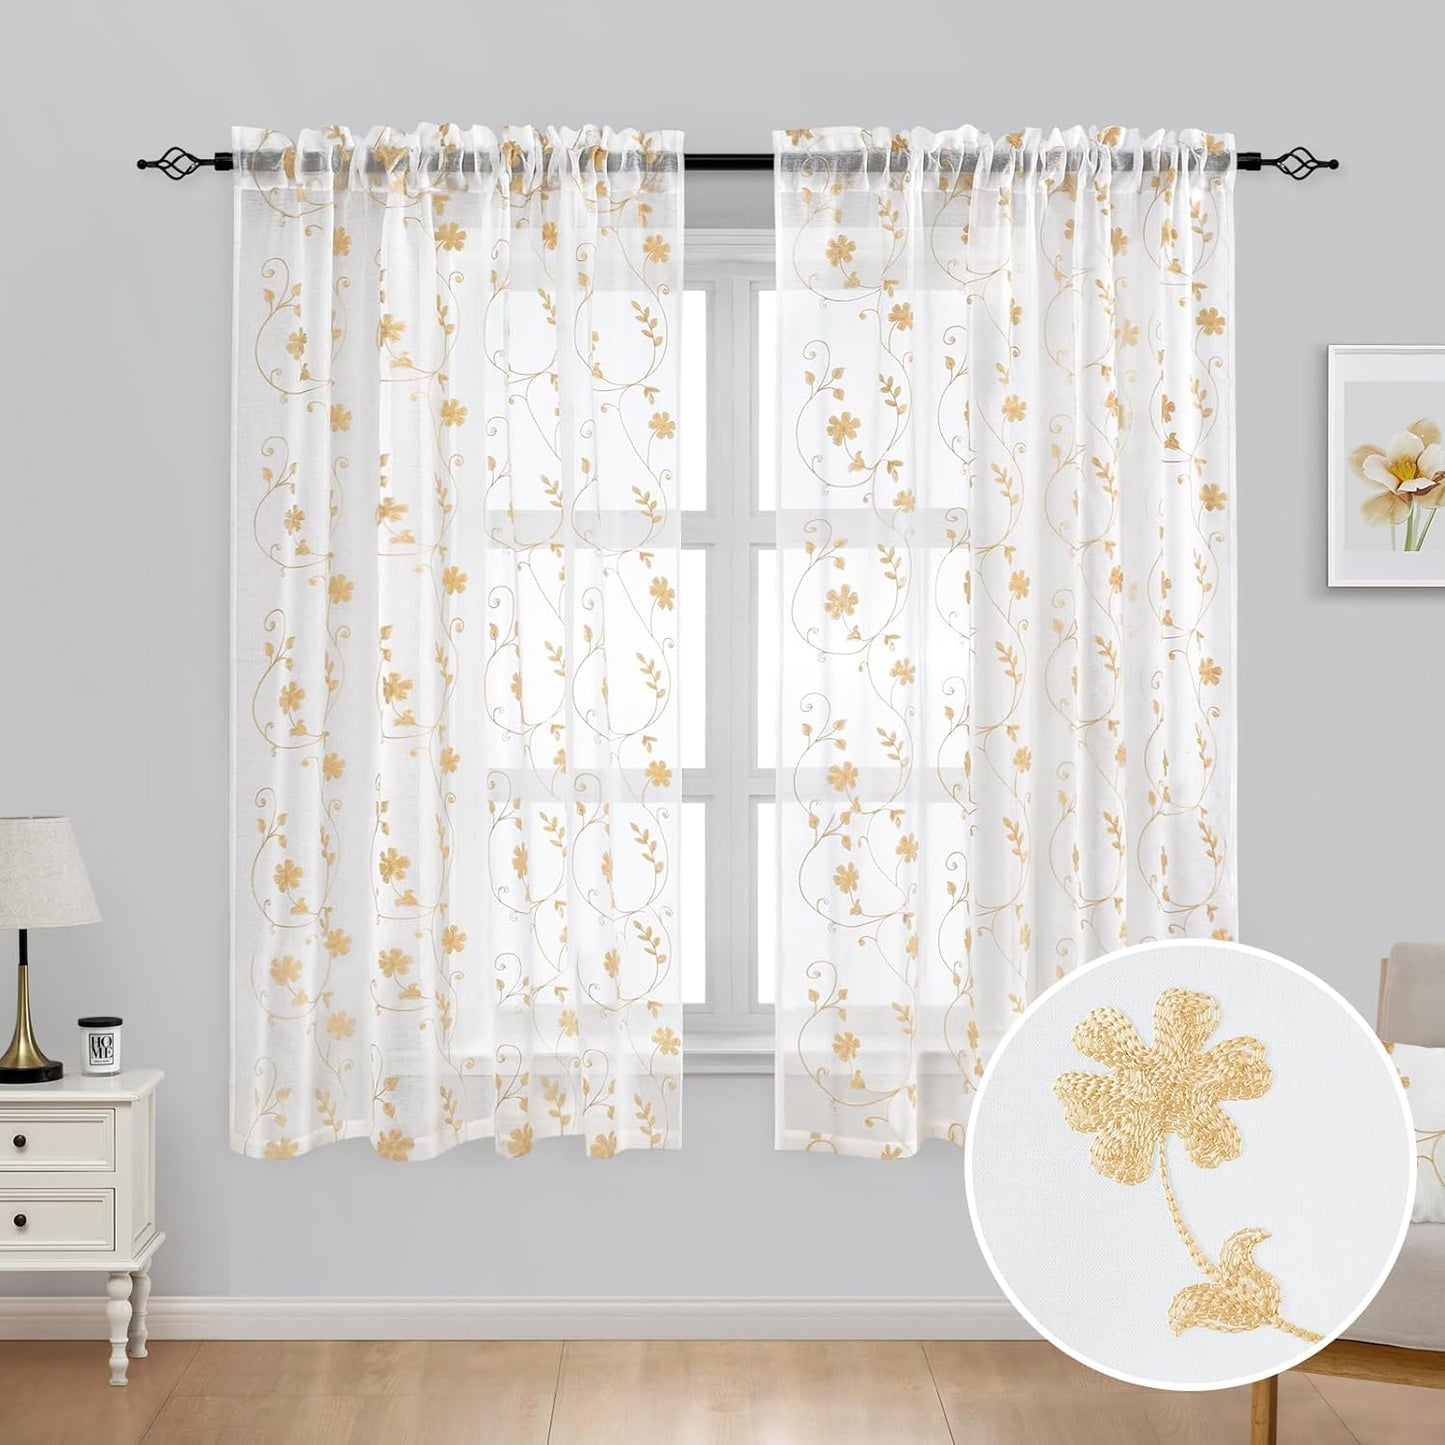 HOMEIDEAS Sage Green Sheer Curtains 52 X 63 Inches Length 2 Panels Embroidered Leaf Pattern Pocket Faux Linen Floral Semi Sheer Voile Window Curtains/Drapes for Bedroom Living Room  HOMEIDEAS White  Yellow W52" X L63" 